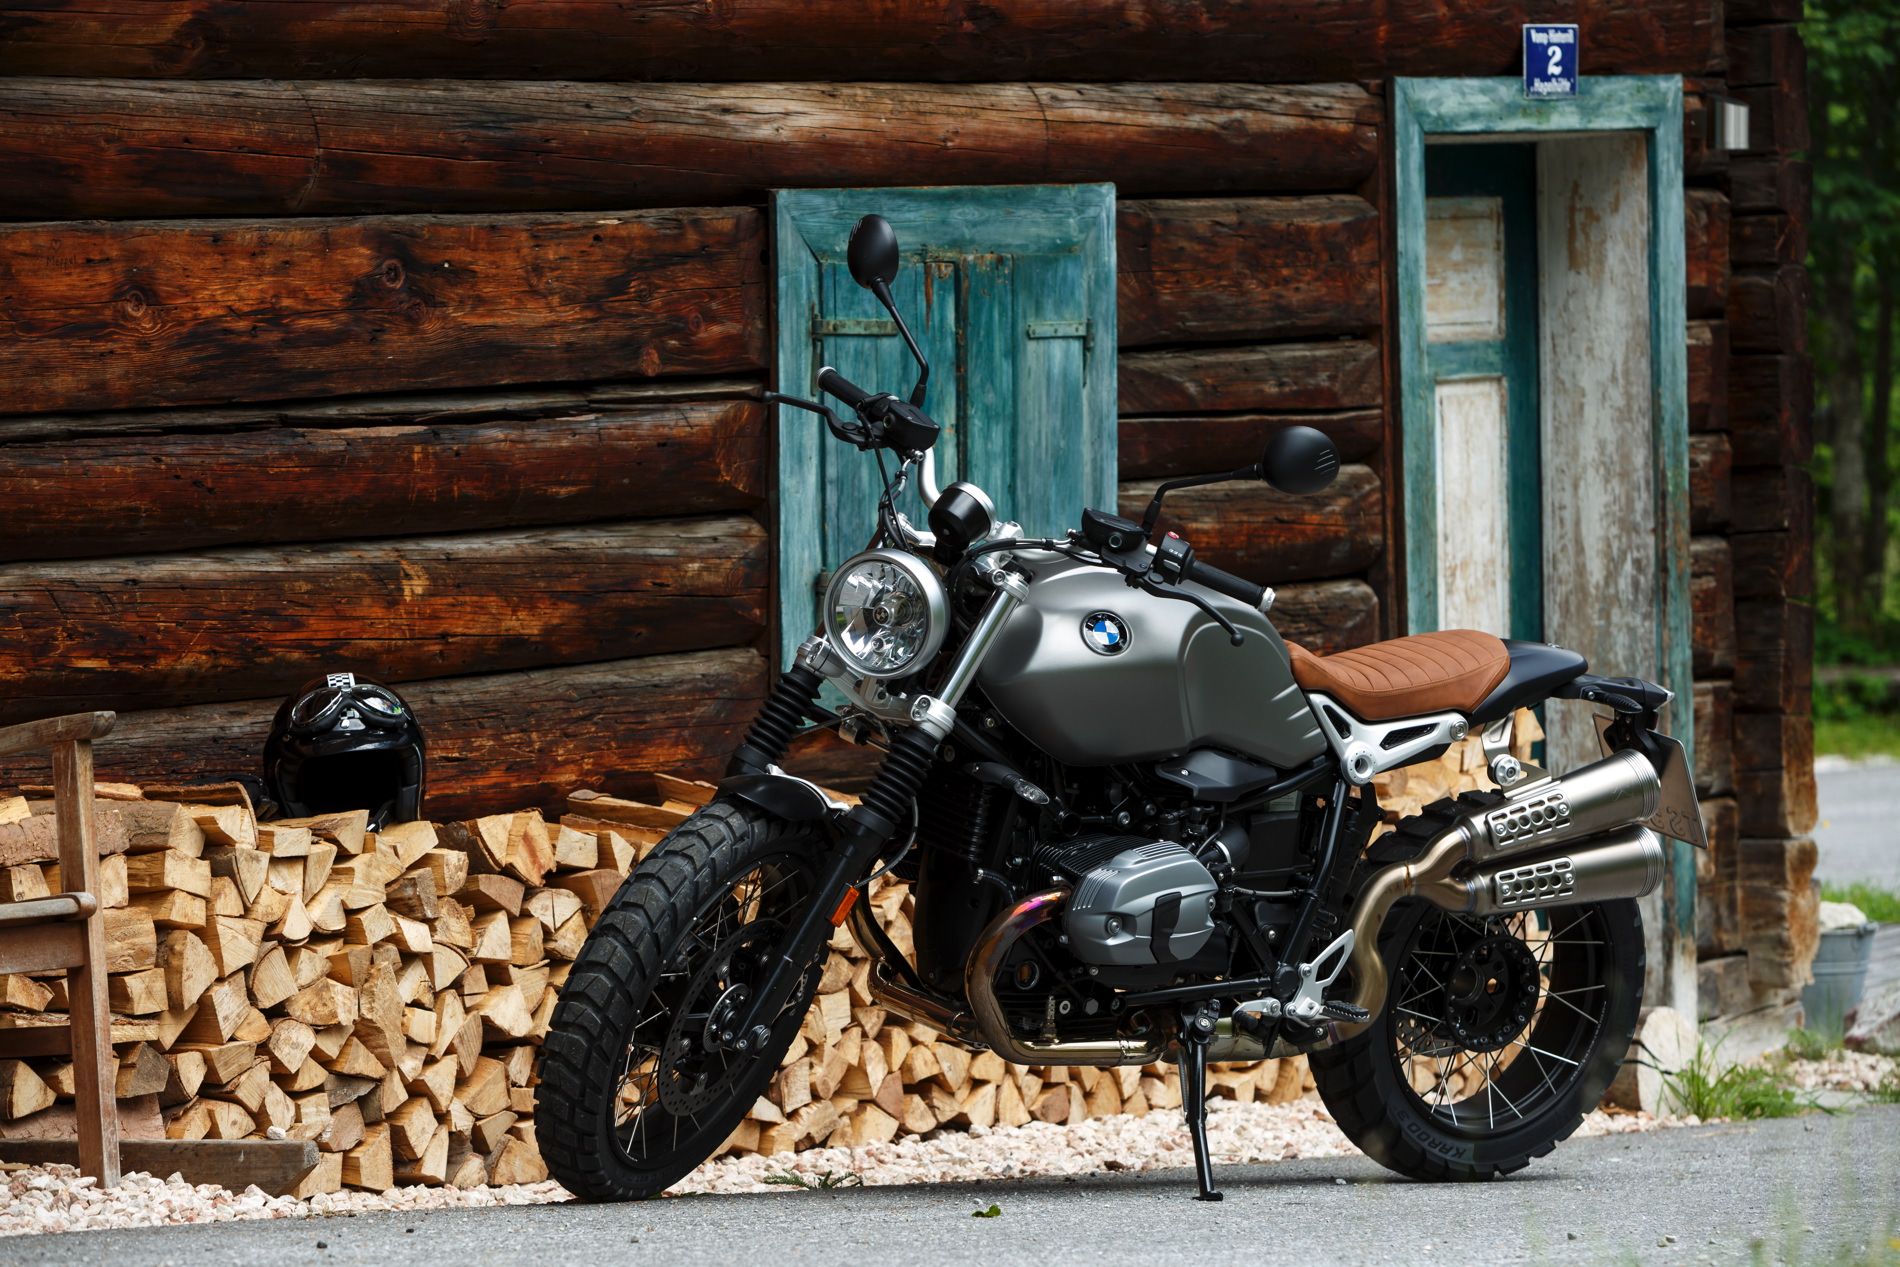 BMW to Introduce Two New Variants of the R nineT?